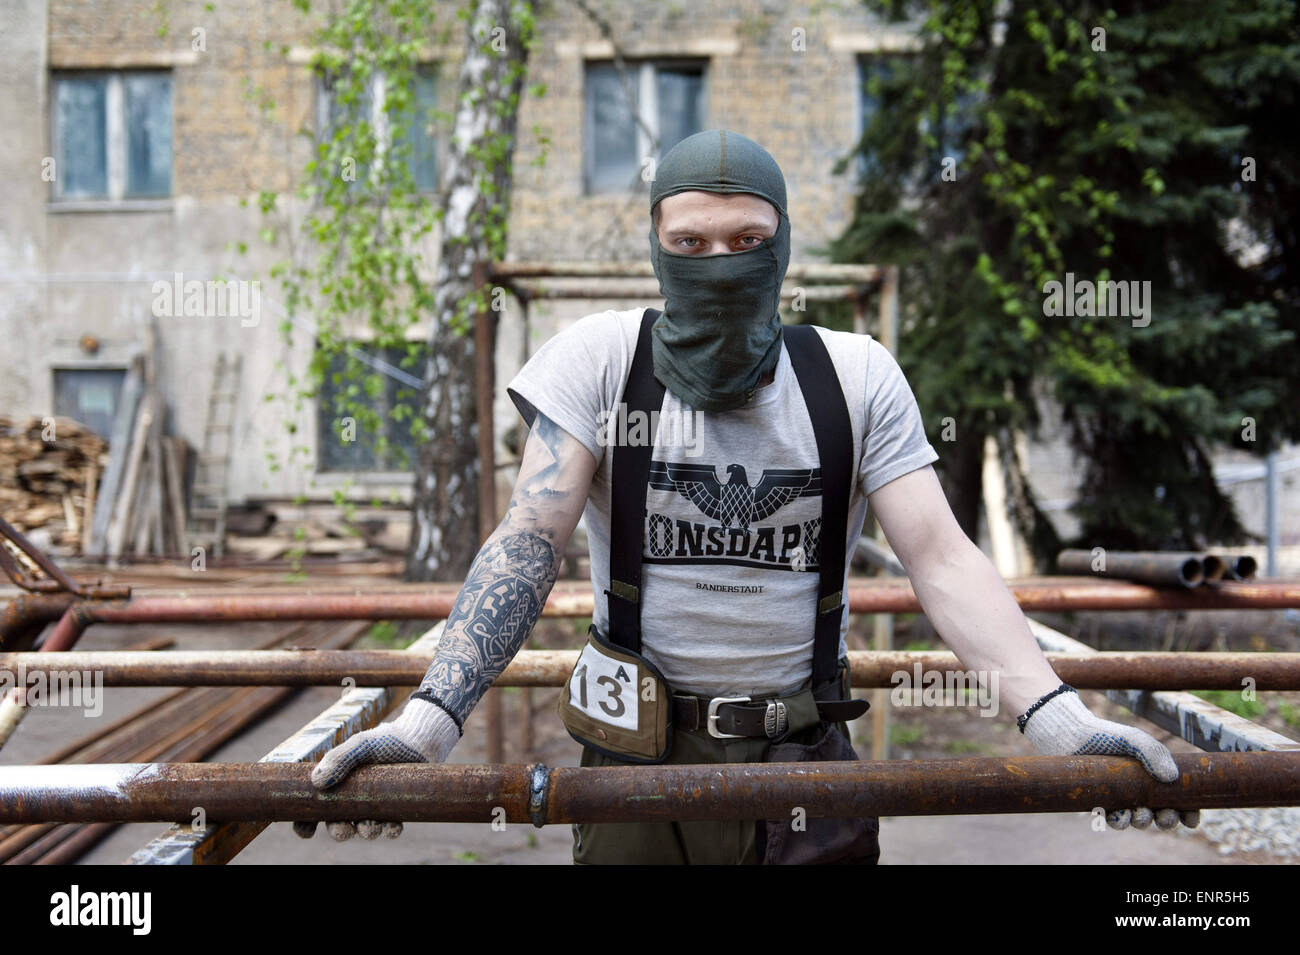 April 25, 2015 - Kiev, Ukraine - An Azov volunteer in their training camp in Kiev. He is wearing a Consdaple shirt, a clothing brand for and by right wing extremists. You can see the letters ''NSDAP'' (Hitler's Nazi party).The Azov battalion was named after the blue waters of this southeastern Ukrainian sea. More than half of the battalionâ€™s fighters are Russian-speaking eastern Ukrainians. Many of the Azov Battalion members are, by their own description, ultra-right Ukrainian nationalists.The Azov training camp is located in a very large area, formerly an ex agricultural machinery factory.  Stock Photo